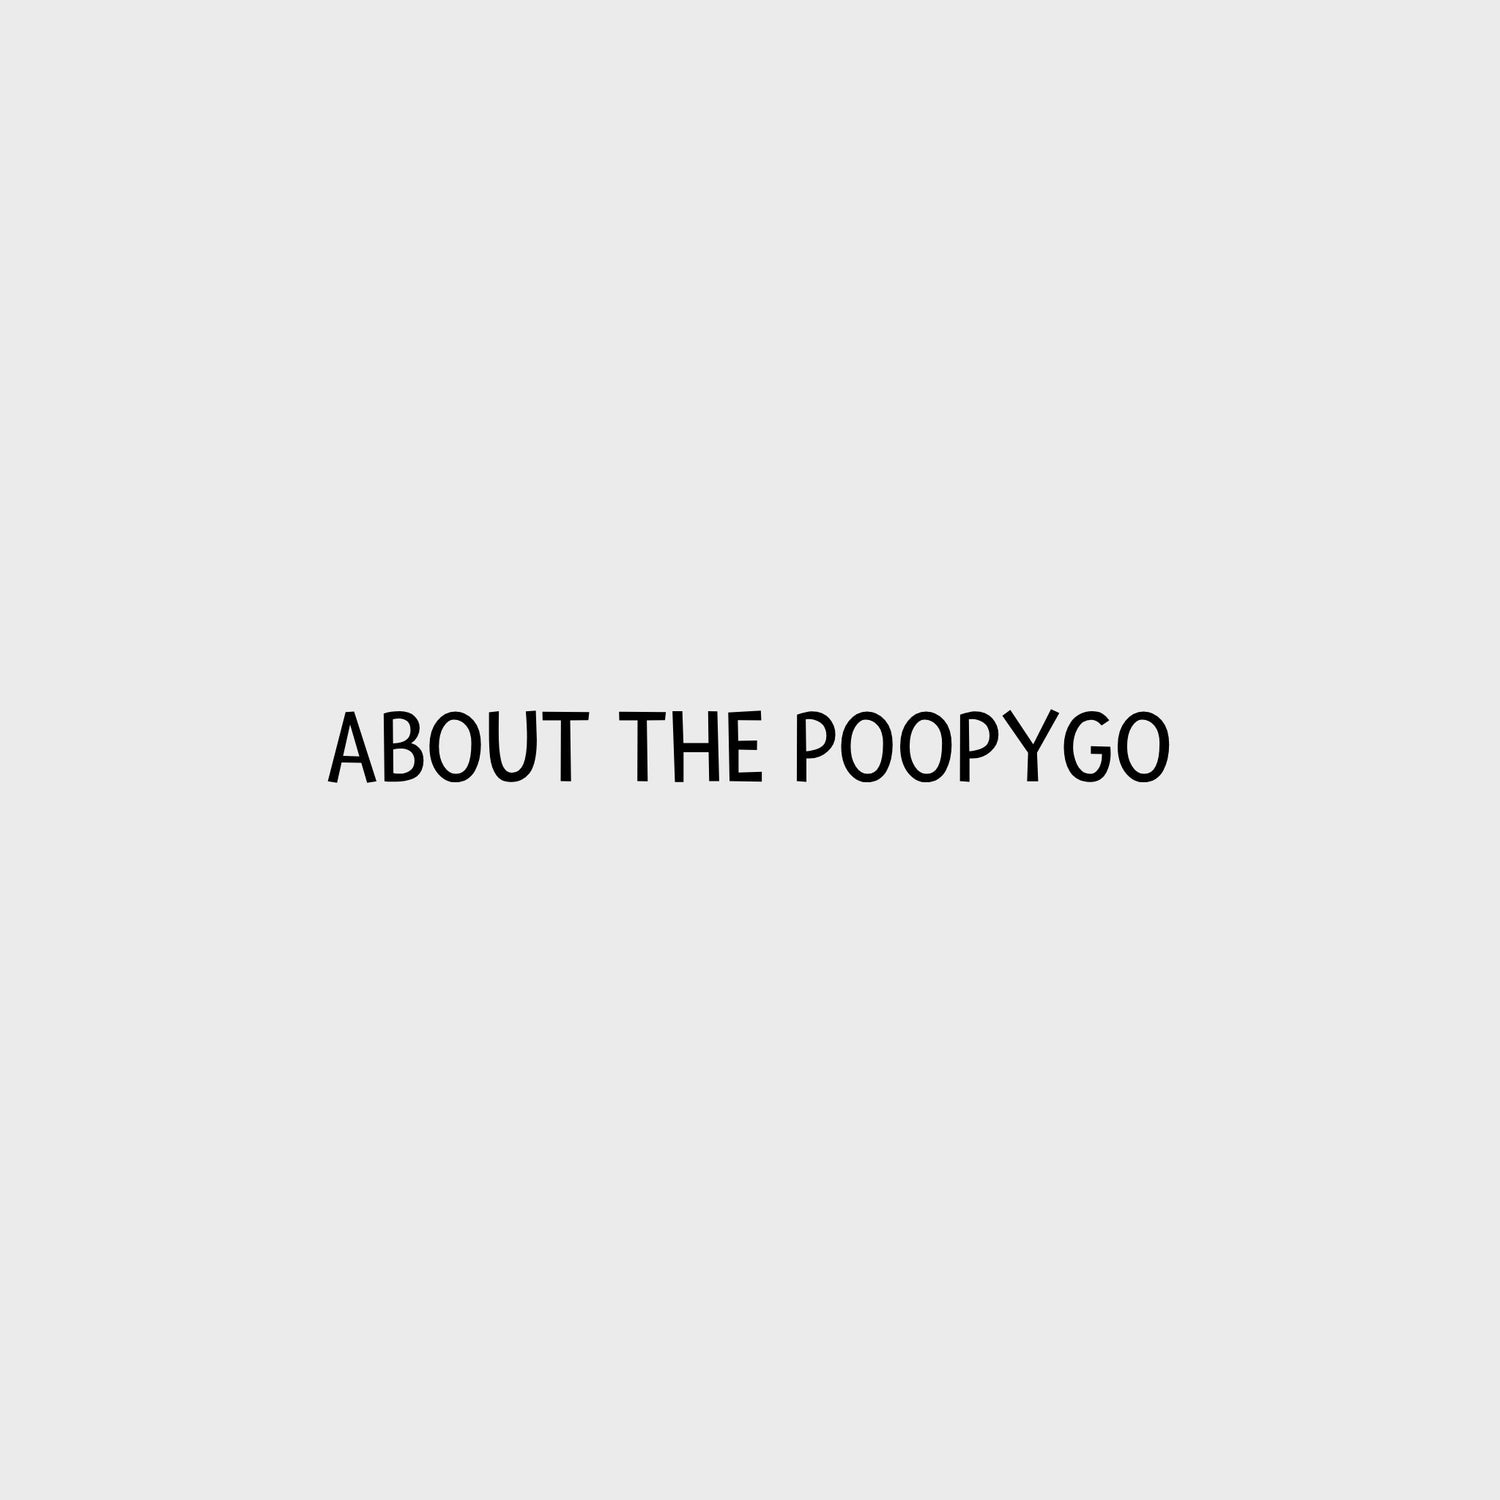 Video - About the PoopyGo